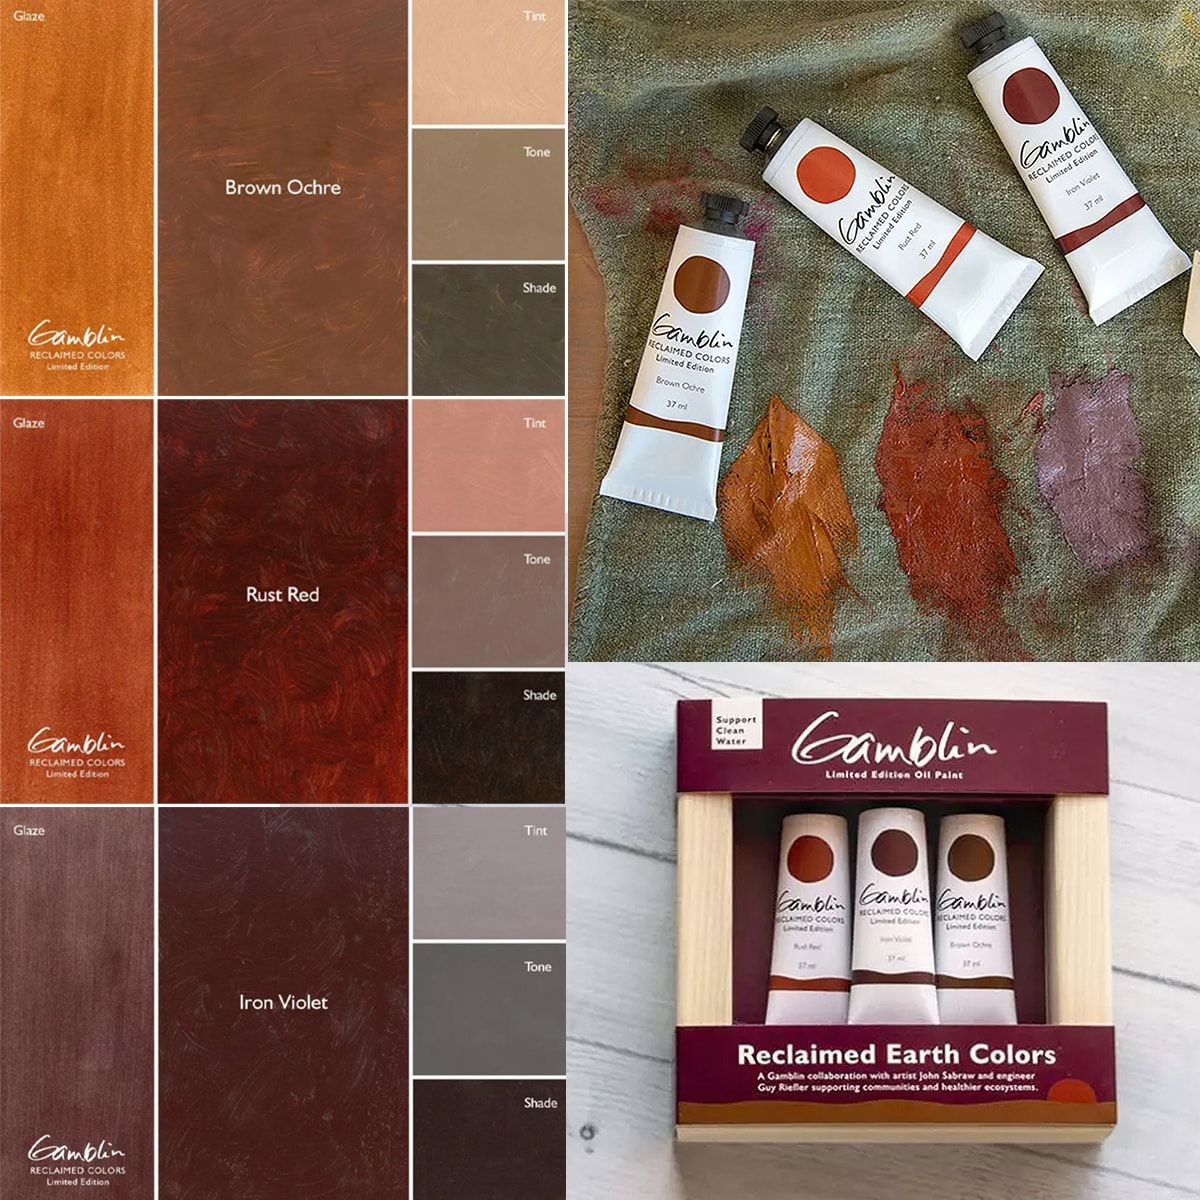 Limited Edition oil paint colors: Brown Ochre, Rust Red, Iron Violet